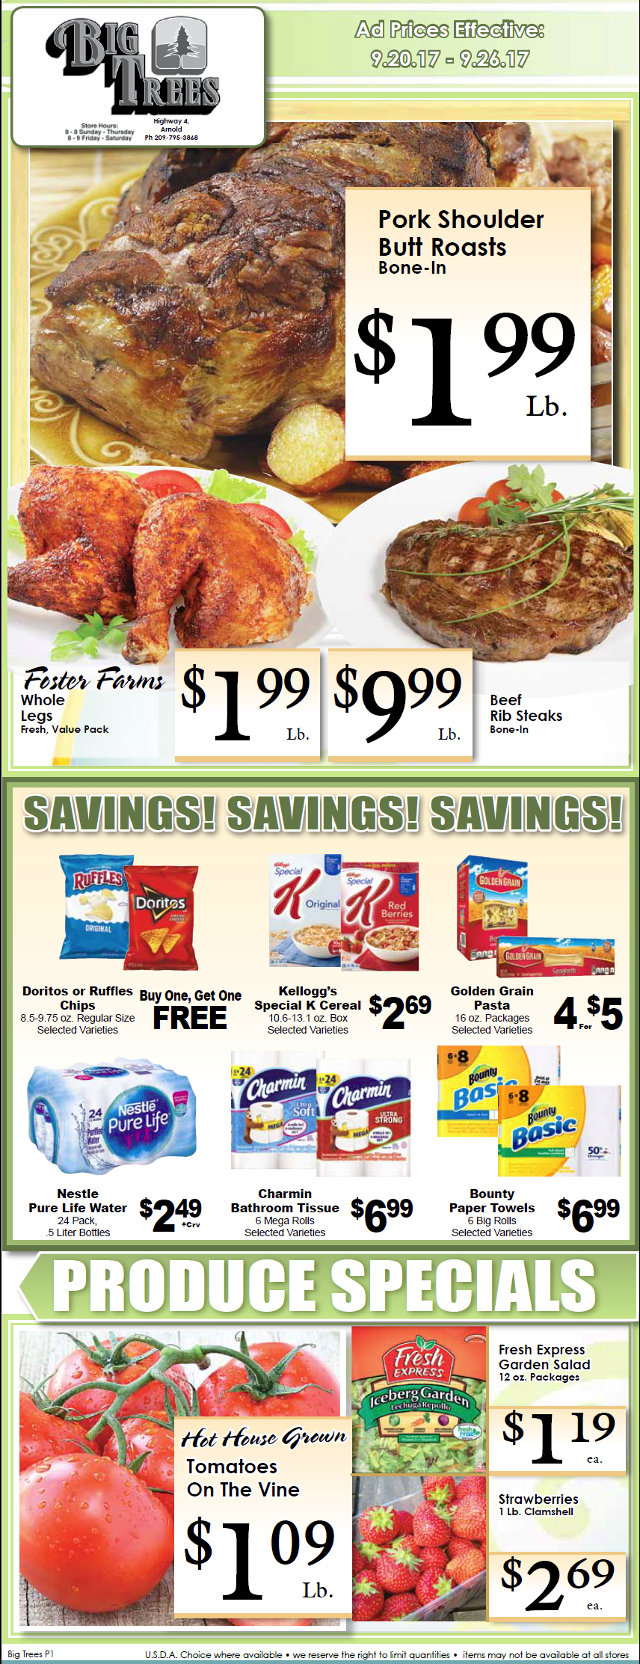 Big Trees Market Weekly Ad & Specials Through September 26th